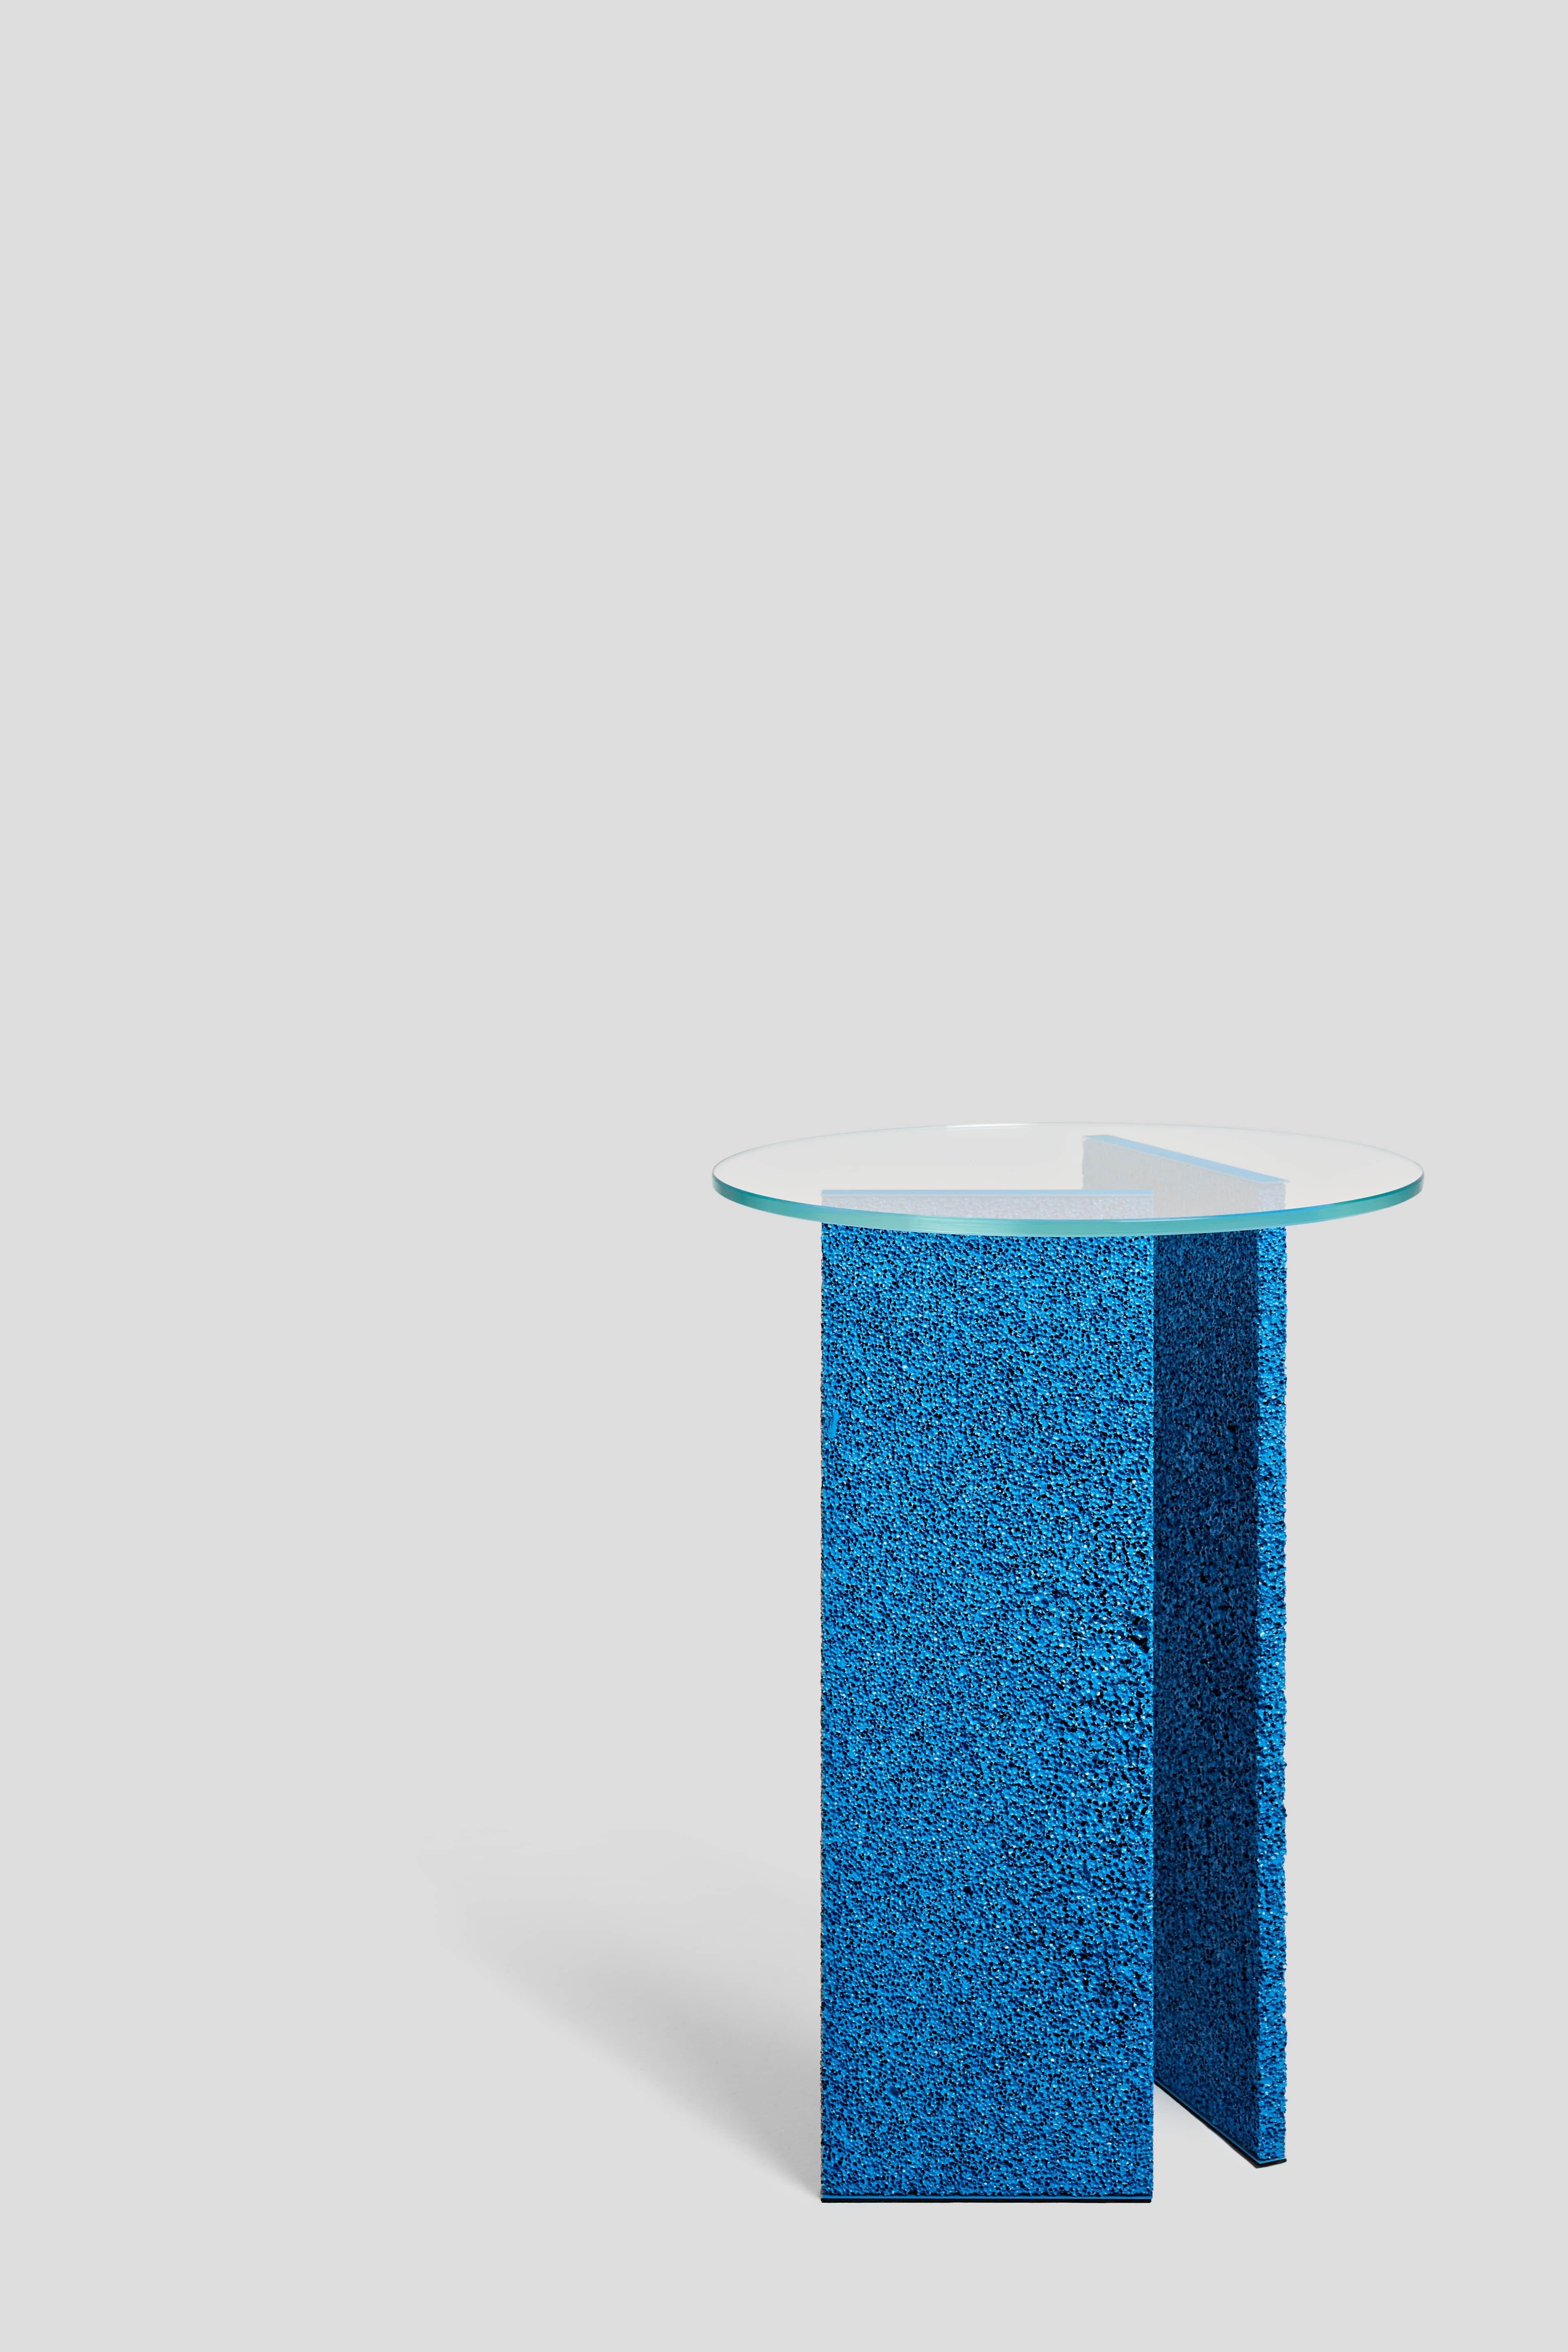 SLAB Textured Blue Side Table with Metal Legs and Glass Top In New Condition For Sale In London, GB